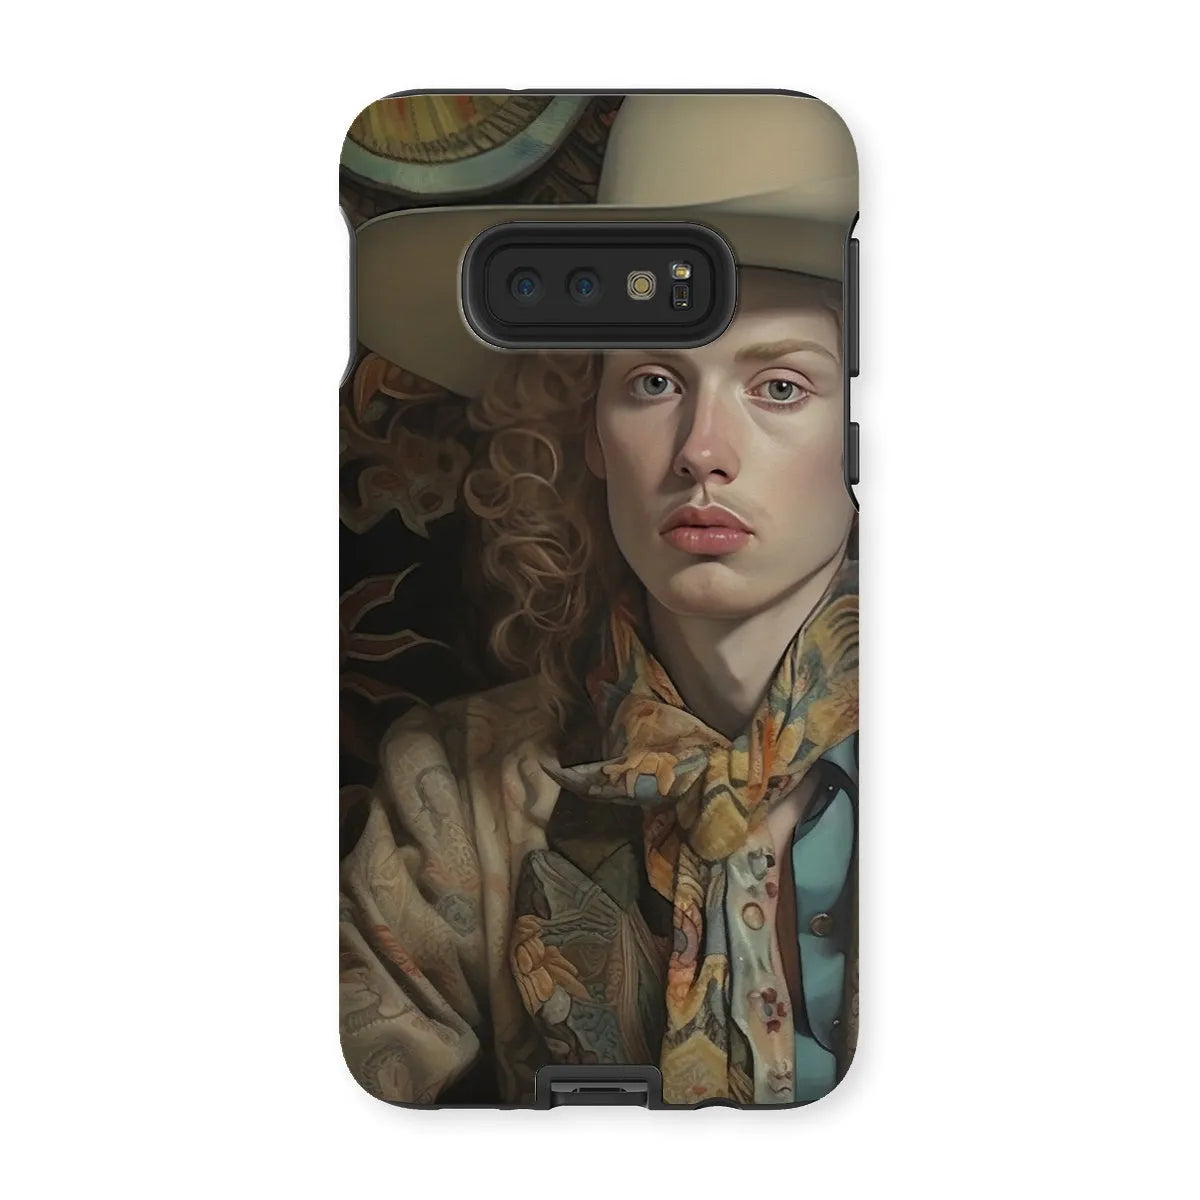 Ollie The Transgender Cowboy - F2m Dandy Outlaw Phone Case - Samsung Galaxy S10e / Matte - Mobile Phone Cases